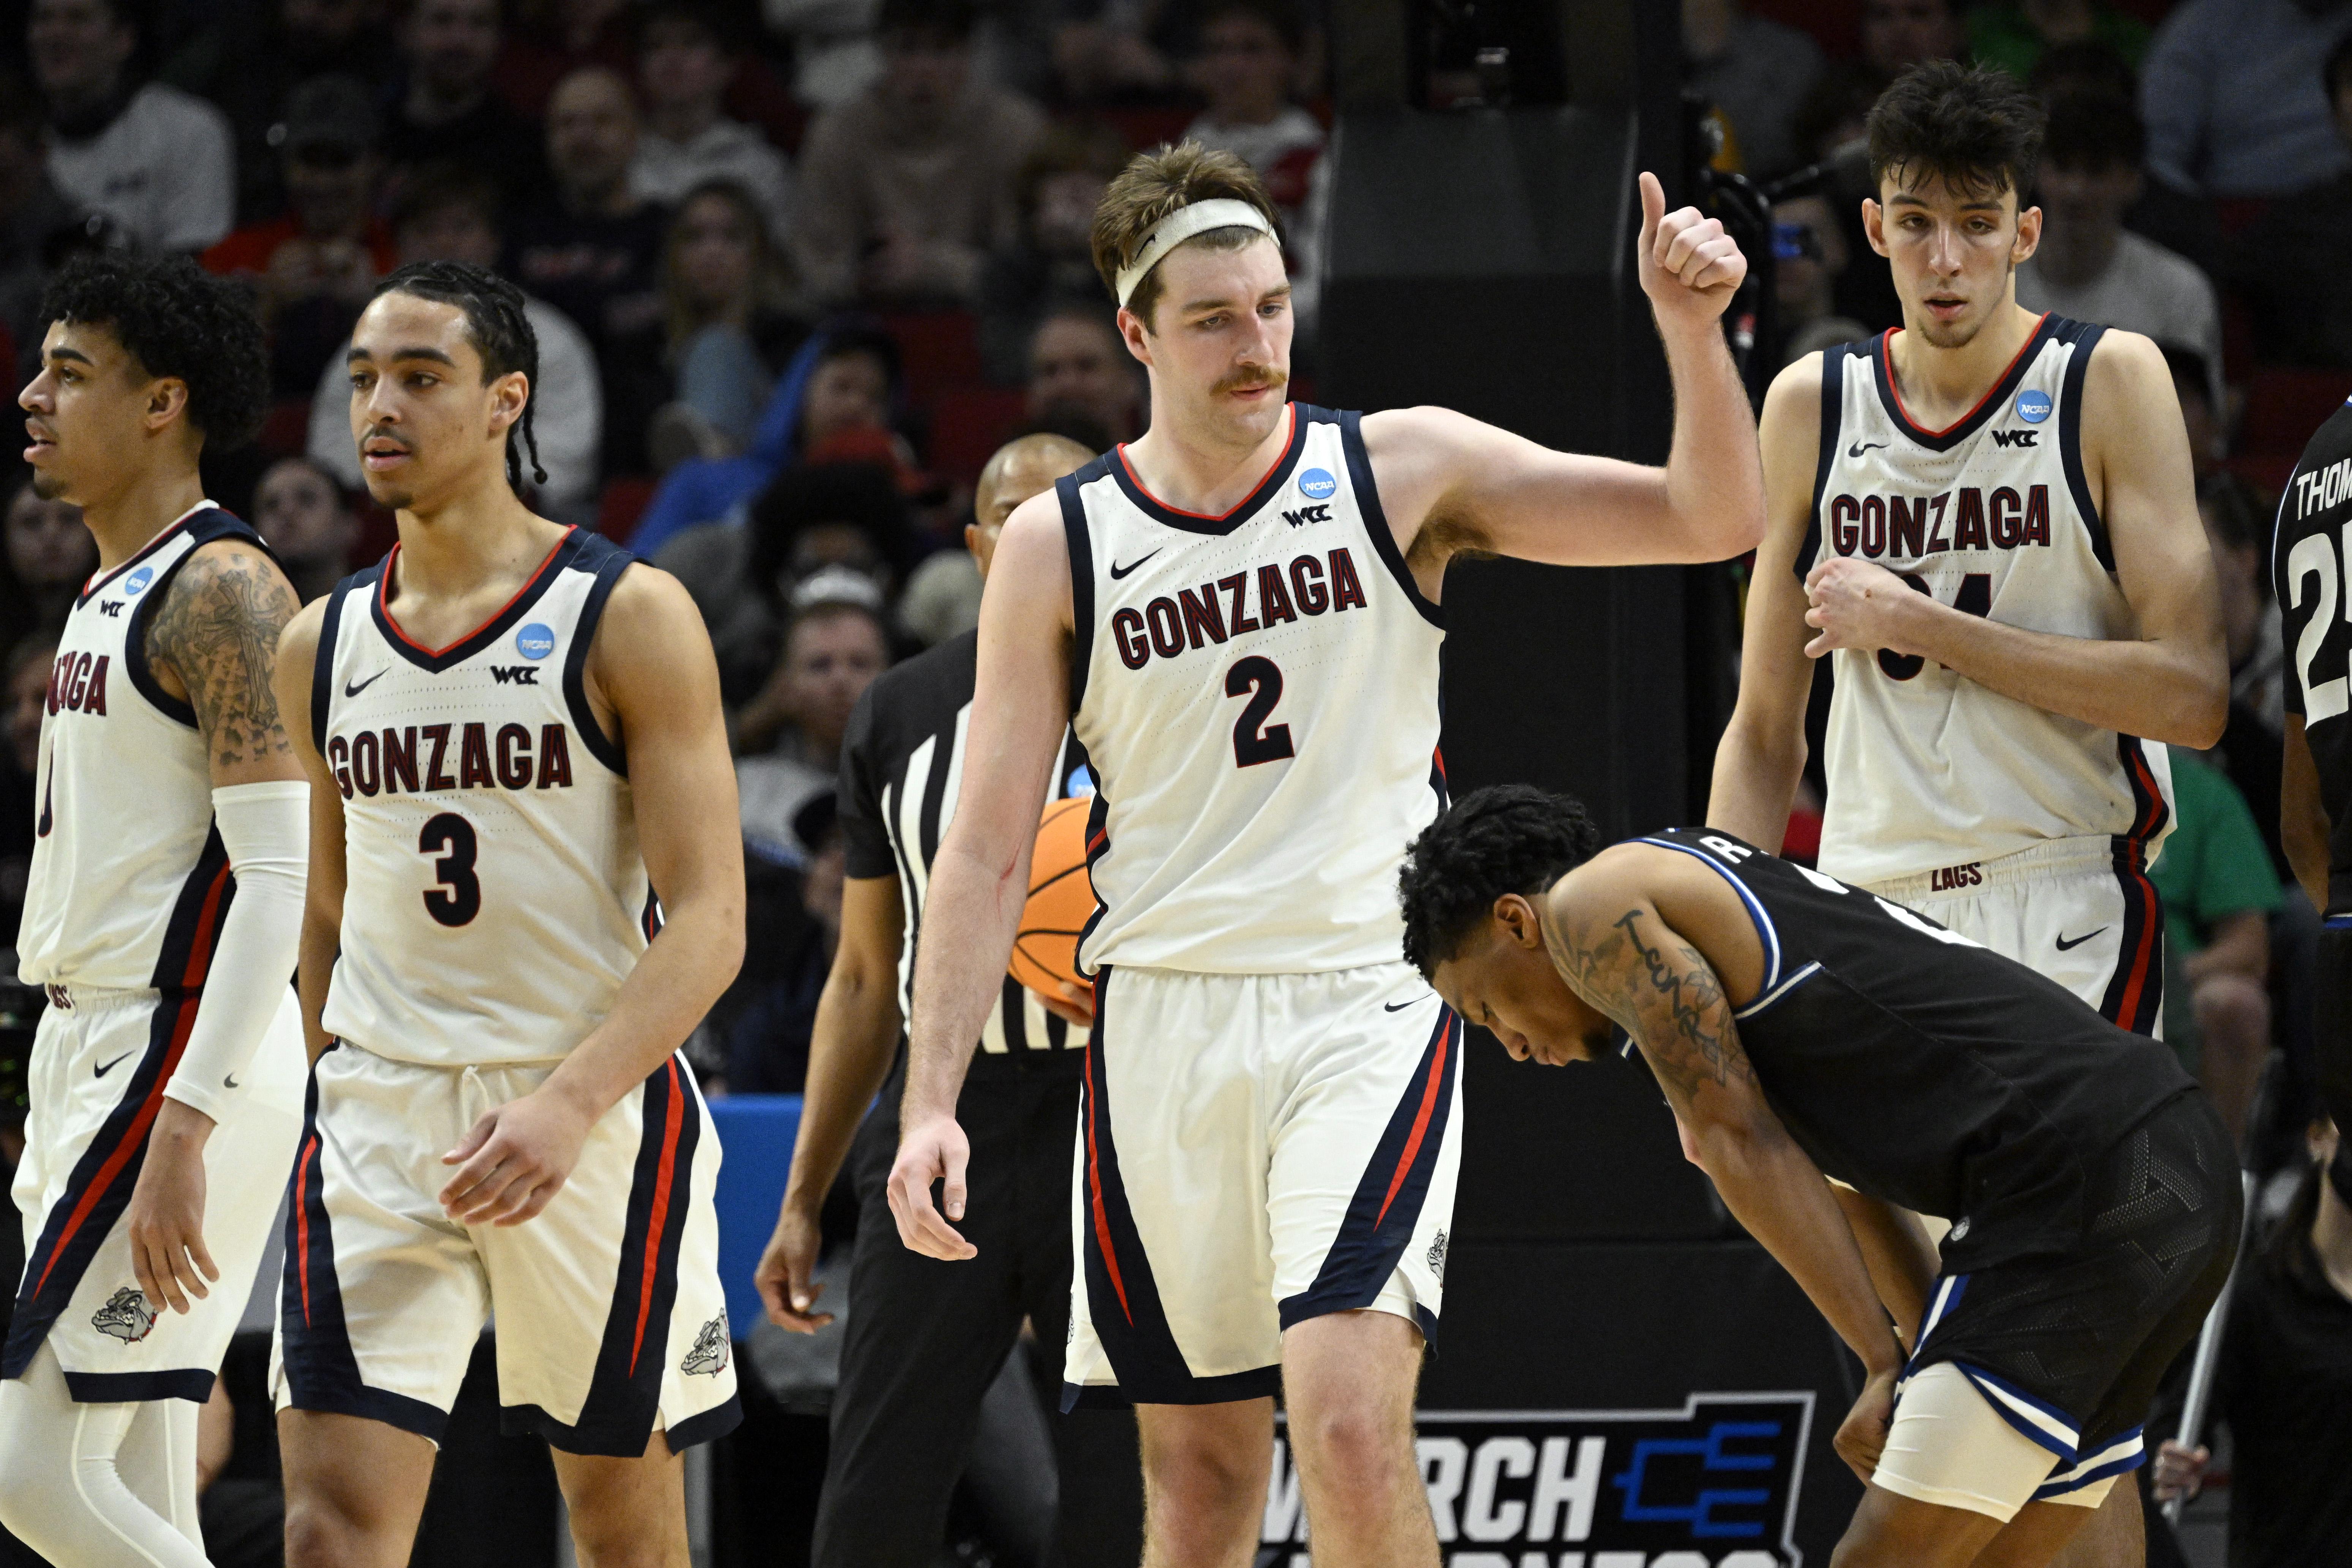 The best players in Gonzaga basketball history